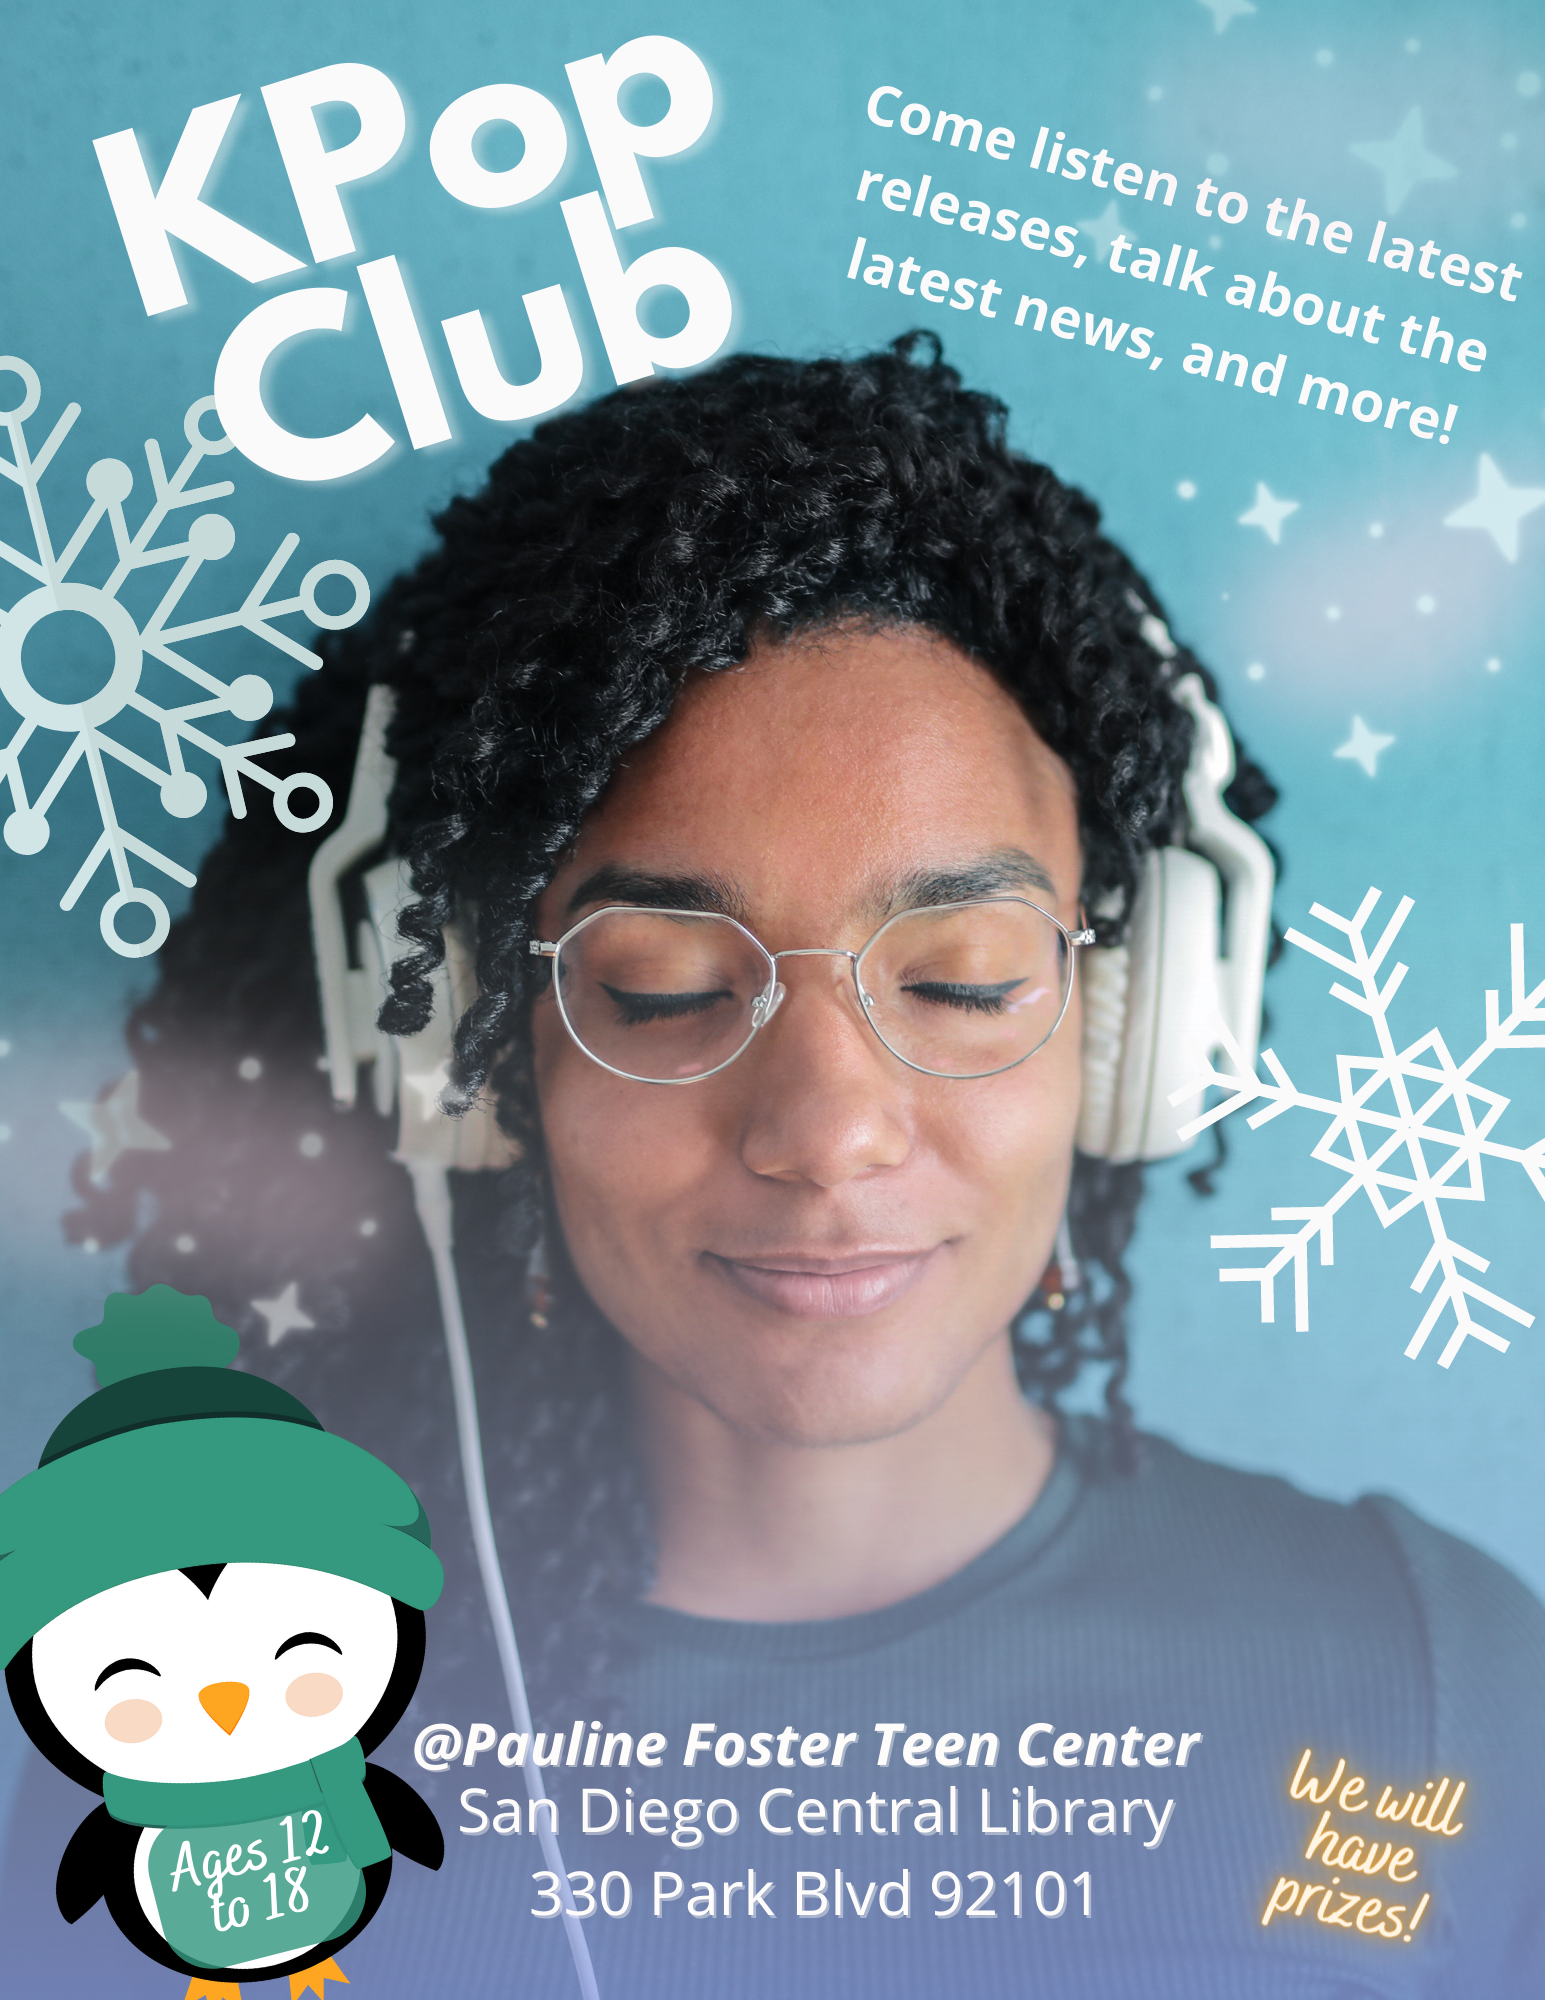 KPop Club. Come listen to the latest releases, talk about the latest news, and more! @Pauline Foster Teen Center, San Diego Central Library, 330 Park Blvd. 92101. We will have prizes! Ages 12 to 18.